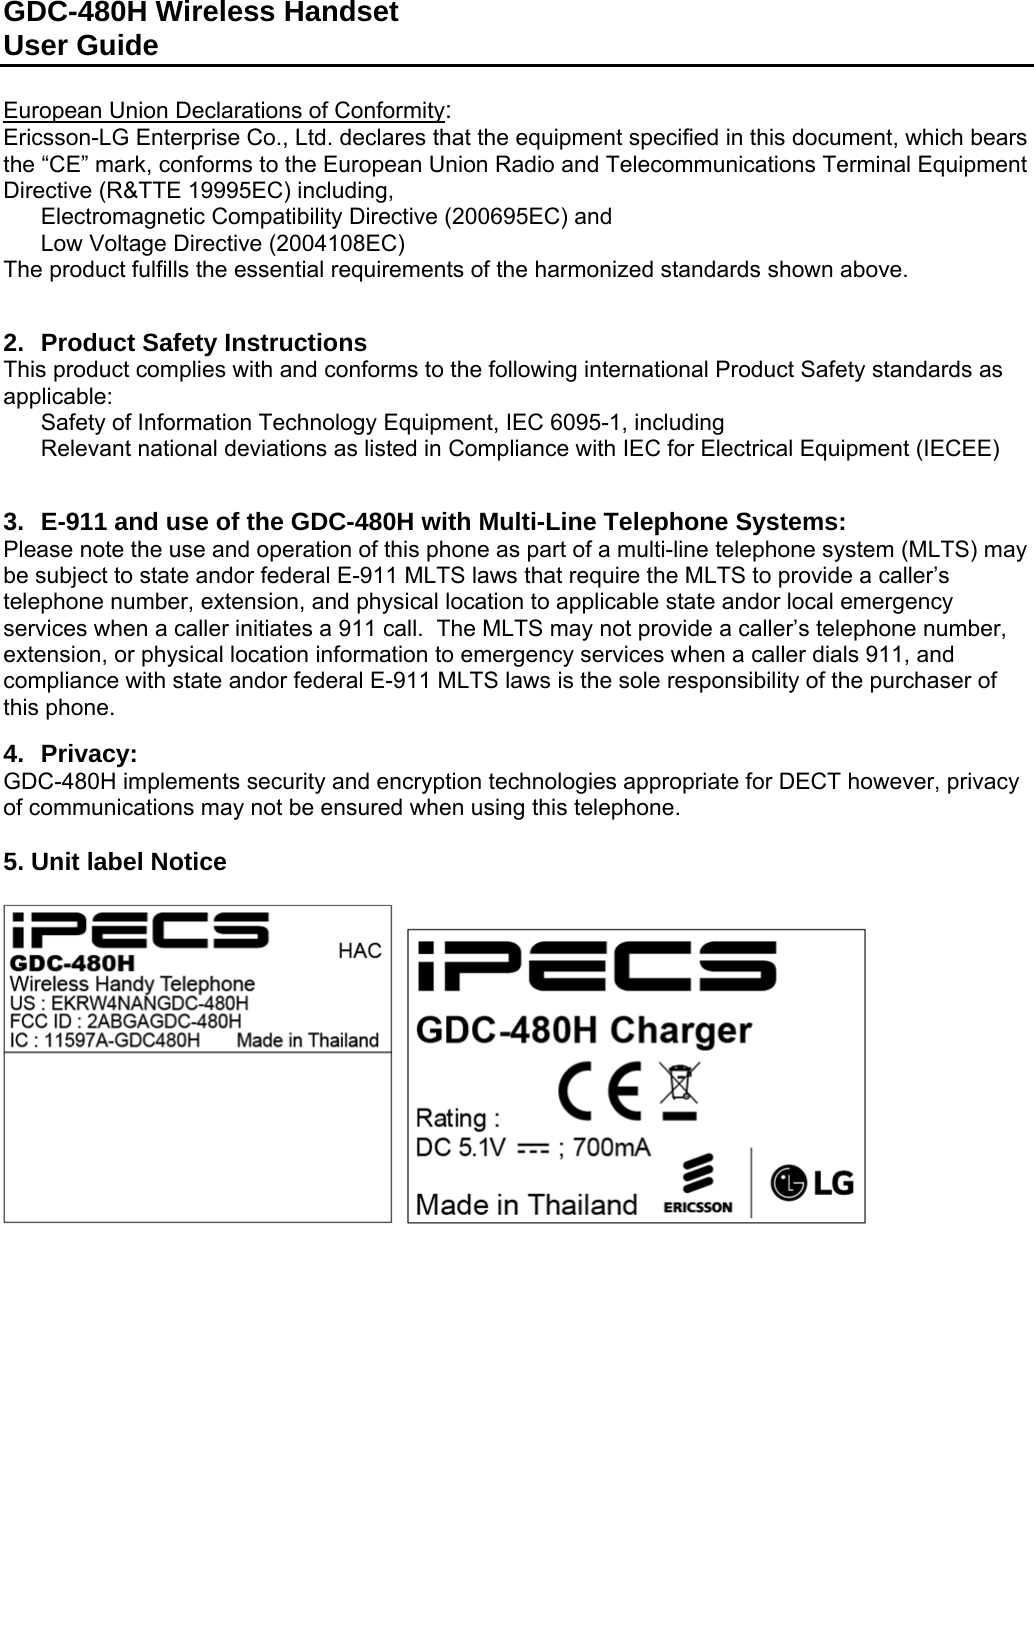 GDC-480H Wireless Handset User Guide   European Union Declarations of Conformity: Ericsson-LG Enterprise Co., Ltd. declares that the equipment specified in this document, which bears the “CE” mark, conforms to the European Union Radio and Telecommunications Terminal Equipment Directive (R&amp;TTE 19995EC) including,   Electromagnetic Compatibility Directive (200695EC) and   Low Voltage Directive (2004108EC) The product fulfills the essential requirements of the harmonized standards shown above.   2.  Product Safety Instructions  This product complies with and conforms to the following international Product Safety standards as applicable:   Safety of Information Technology Equipment, IEC 6095-1, including   Relevant national deviations as listed in Compliance with IEC for Electrical Equipment (IECEE)    3.  E-911 and use of the GDC-480H with Multi-Line Telephone Systems: Please note the use and operation of this phone as part of a multi-line telephone system (MLTS) may be subject to state andor federal E-911 MLTS laws that require the MLTS to provide a caller’s telephone number, extension, and physical location to applicable state andor local emergency services when a caller initiates a 911 call.  The MLTS may not provide a caller’s telephone number, extension, or physical location information to emergency services when a caller dials 911, and compliance with state andor federal E-911 MLTS laws is the sole responsibility of the purchaser of this phone.  4. Privacy: GDC-480H implements security and encryption technologies appropriate for DECT however, privacy of communications may not be ensured when using this telephone.  5. Unit label Notice      